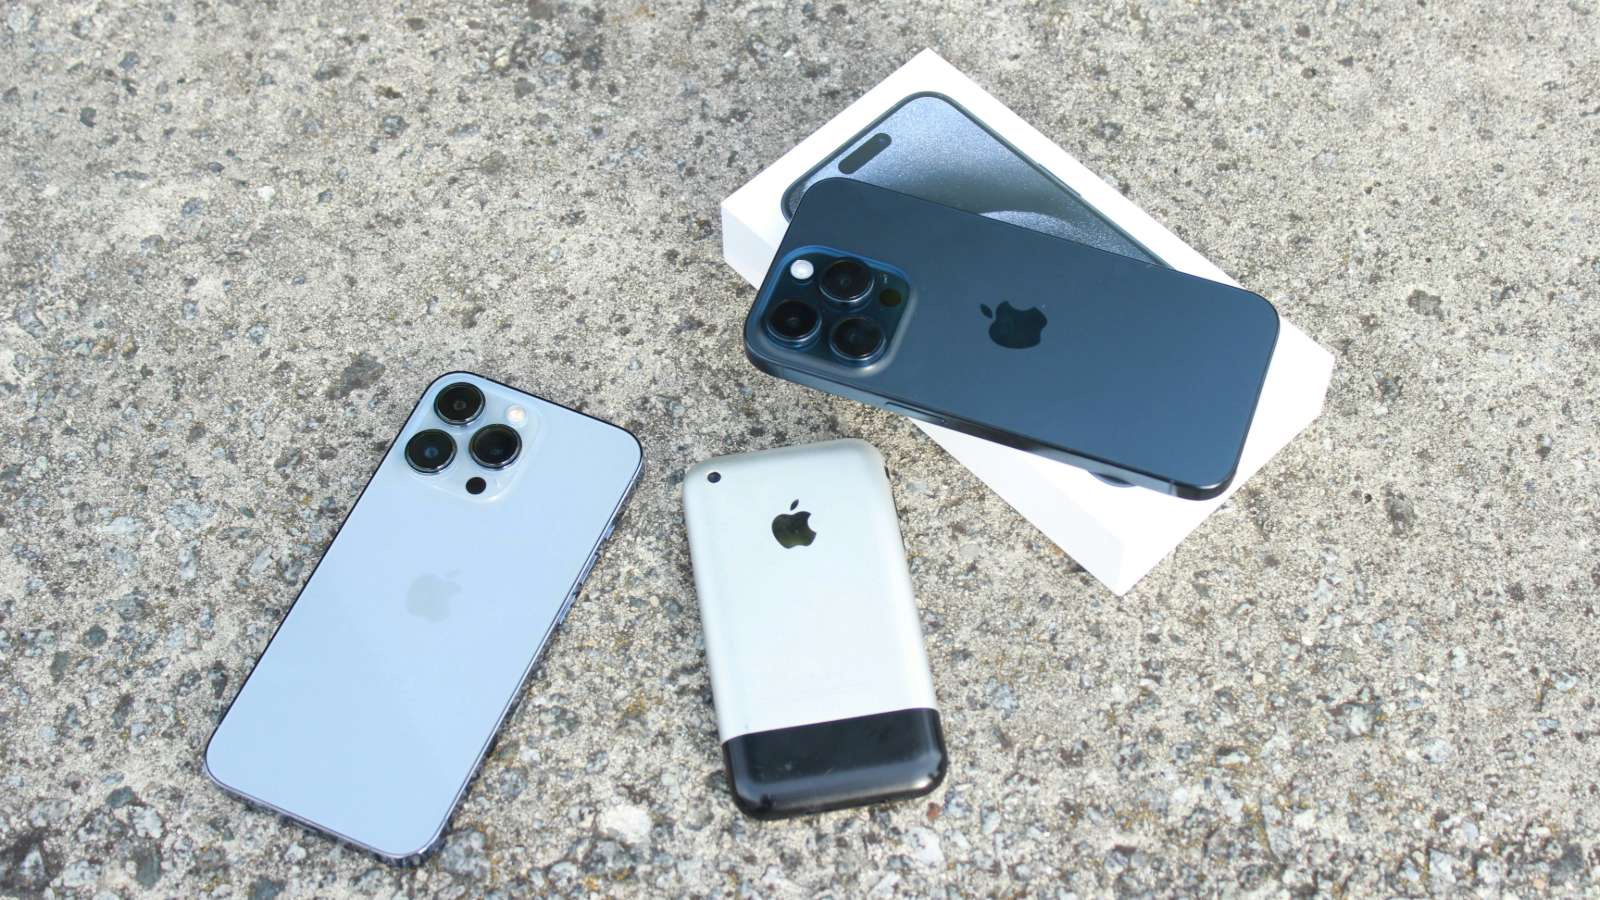 Image showing three iPhones from different generations next to each other